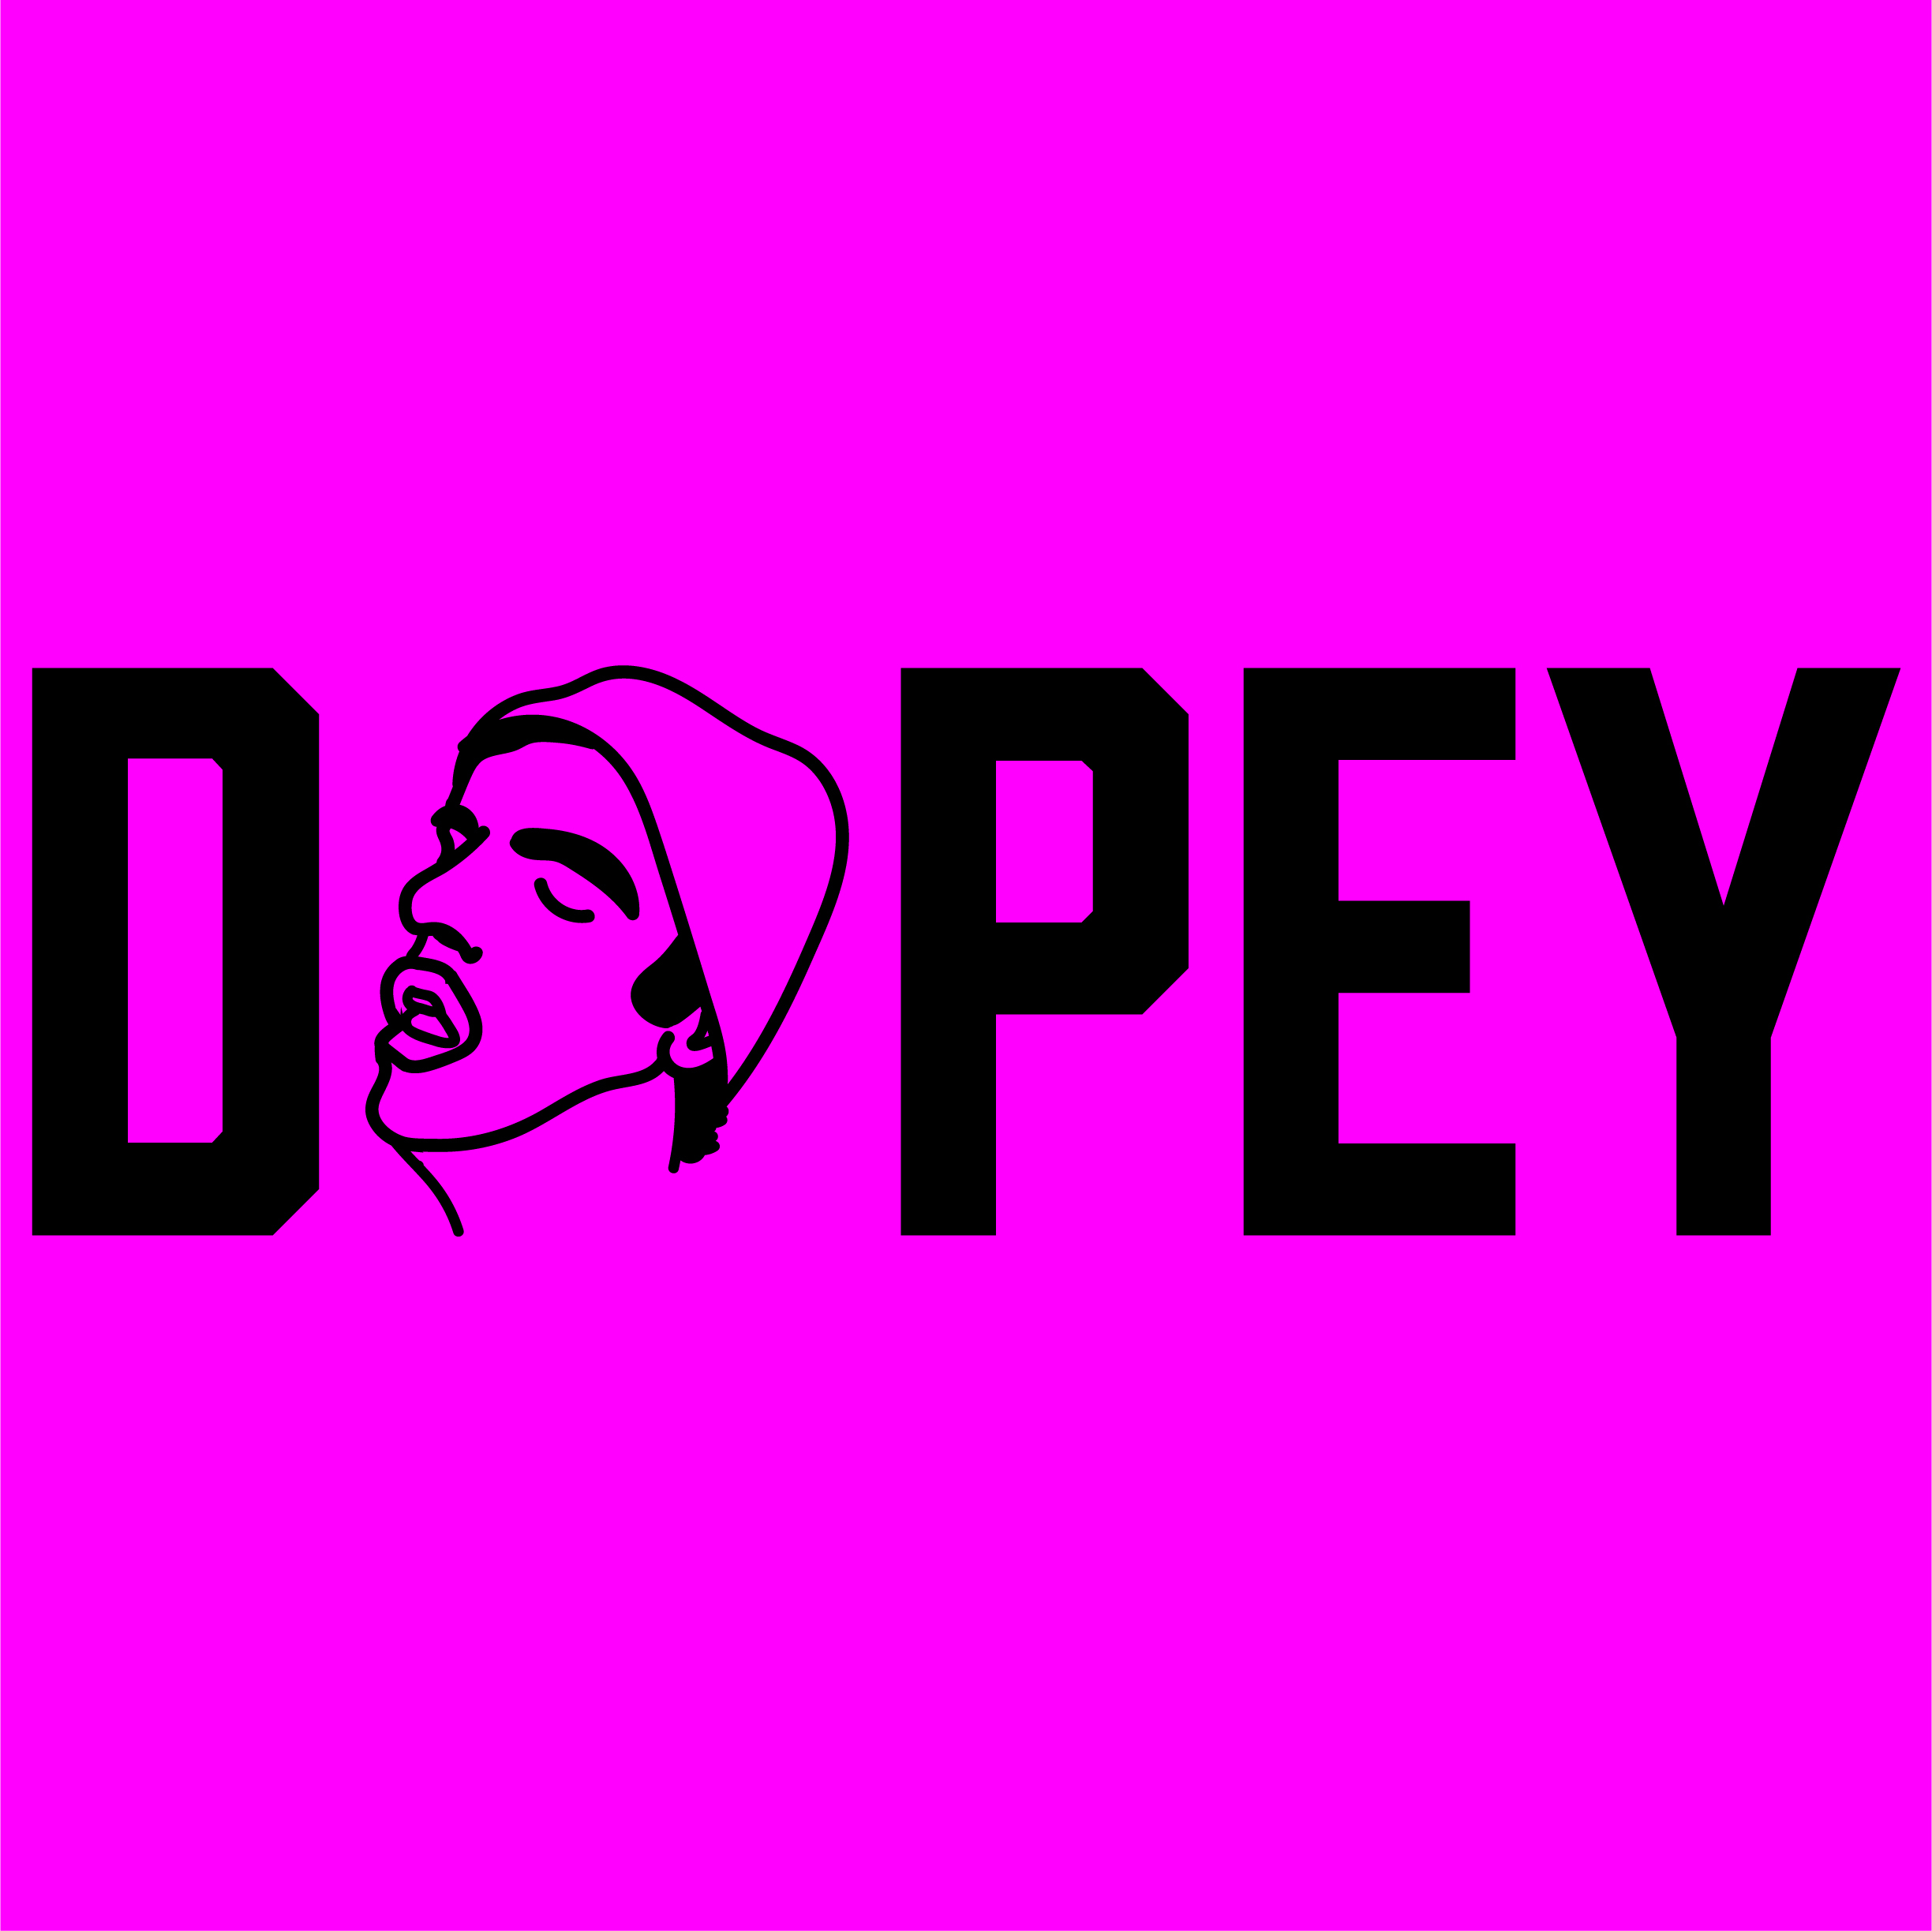 Dopey119: Expressing Sammy’s Anal Glands, 3 Cars Crashed in One Day, Puking Donuts, Shooting Cocaine, Fentanyl, Dave’s Dad